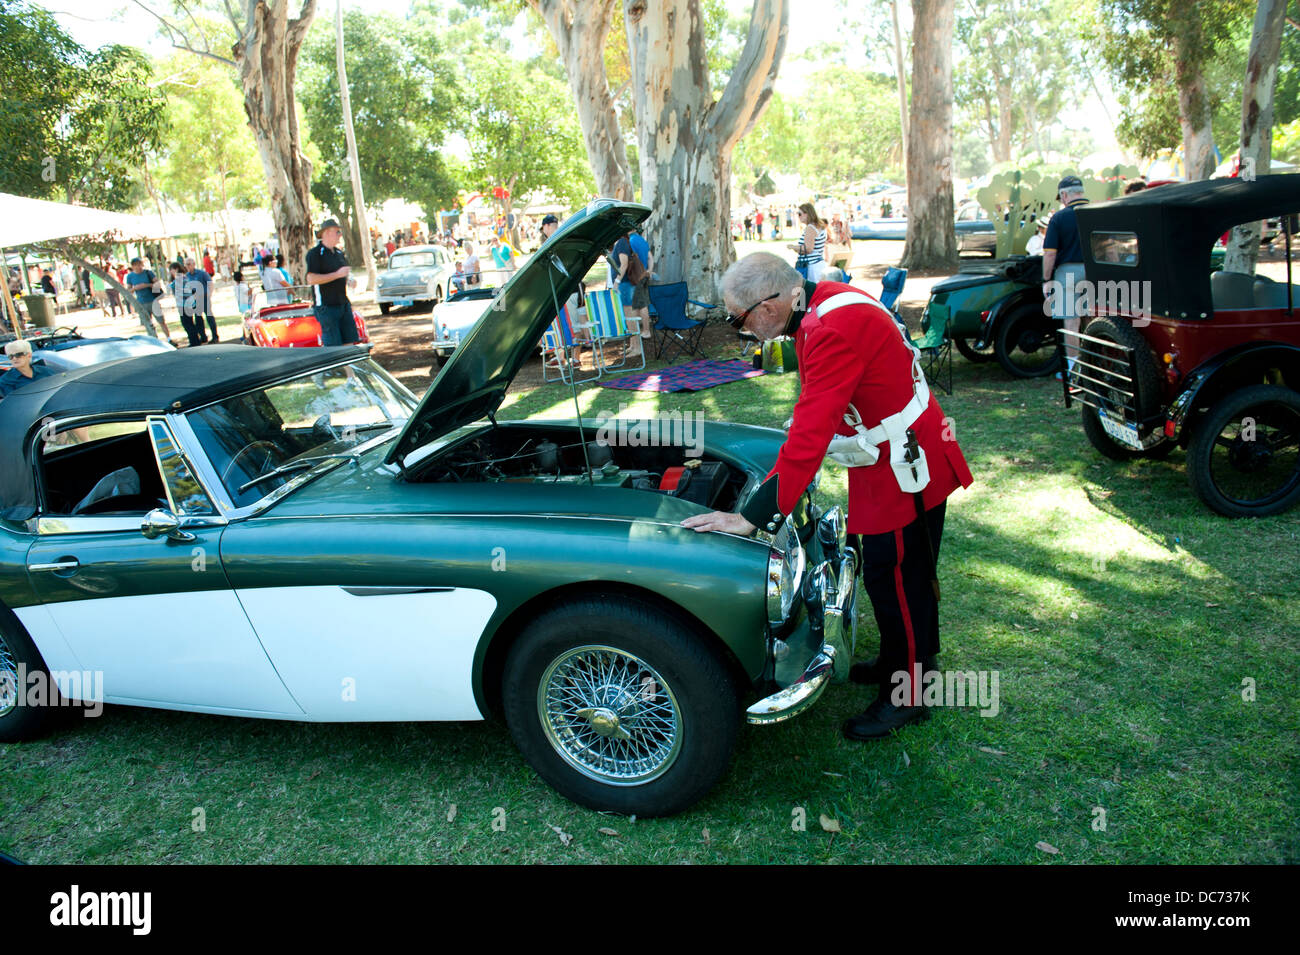 Man in period military costume inspecting motor of classic Austin-Healey 3000 sportscar. Stock Photo